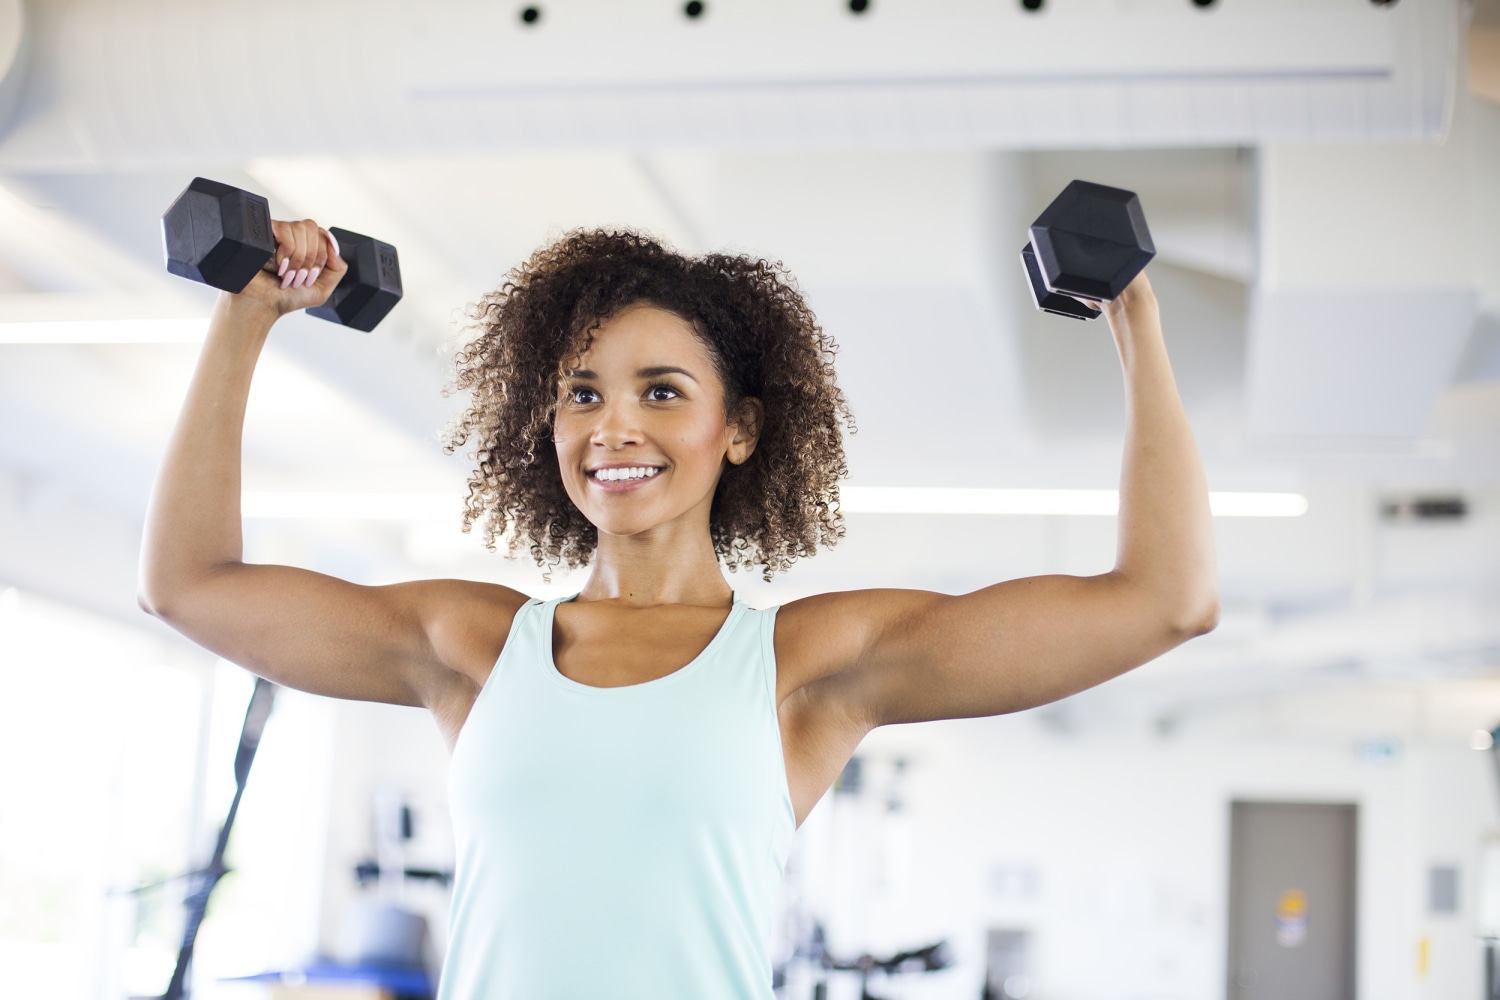 https://media-cldnry.s-nbcnews.com/image/upload/t_fit-1500w,f_auto,q_auto:best/newscms/2019_40/3029611/190927-exercise-woman-weights-ac-1159p.jpg